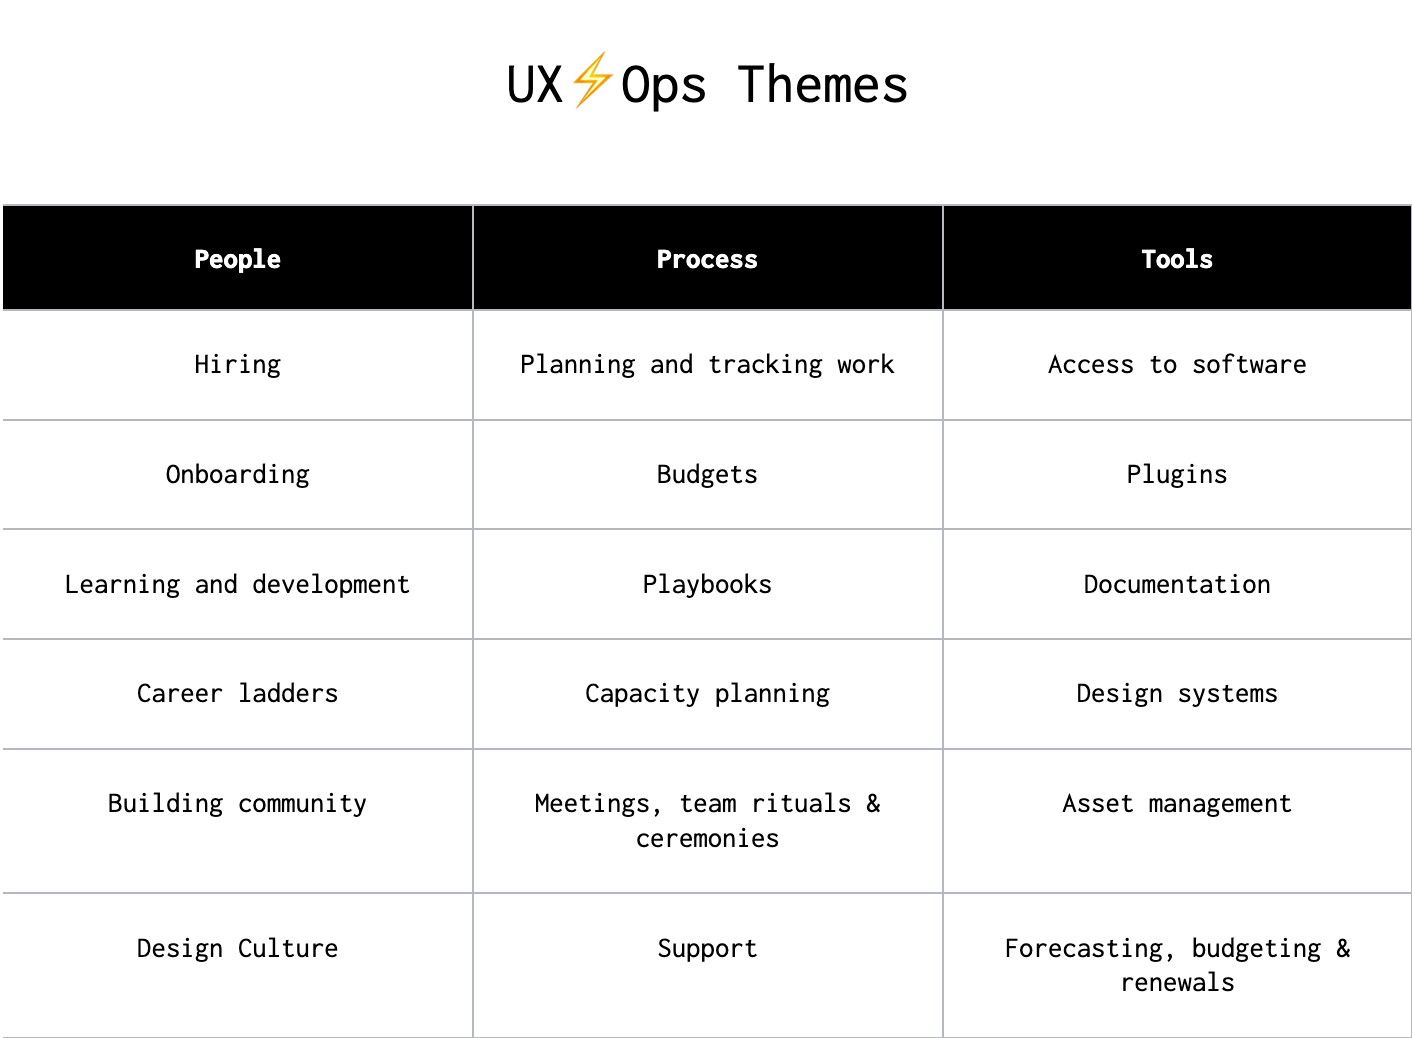 UX Ops Themes